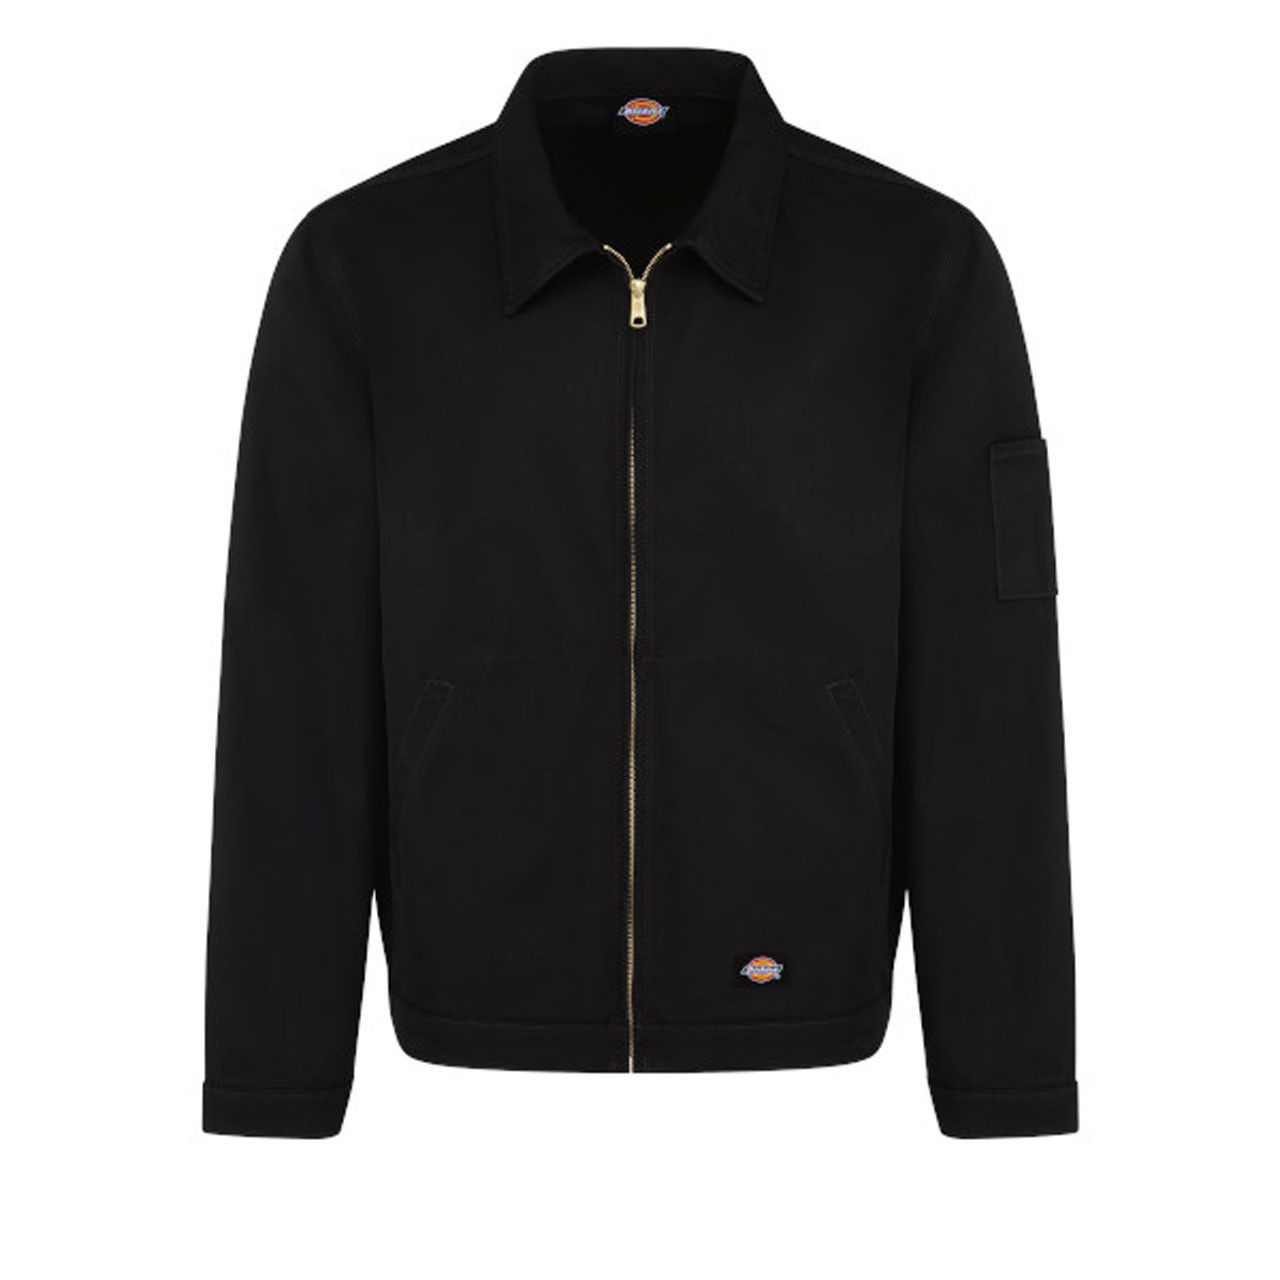 What type of stitching does the Dickies Unlined Industrial Eisenhower Jacket have?